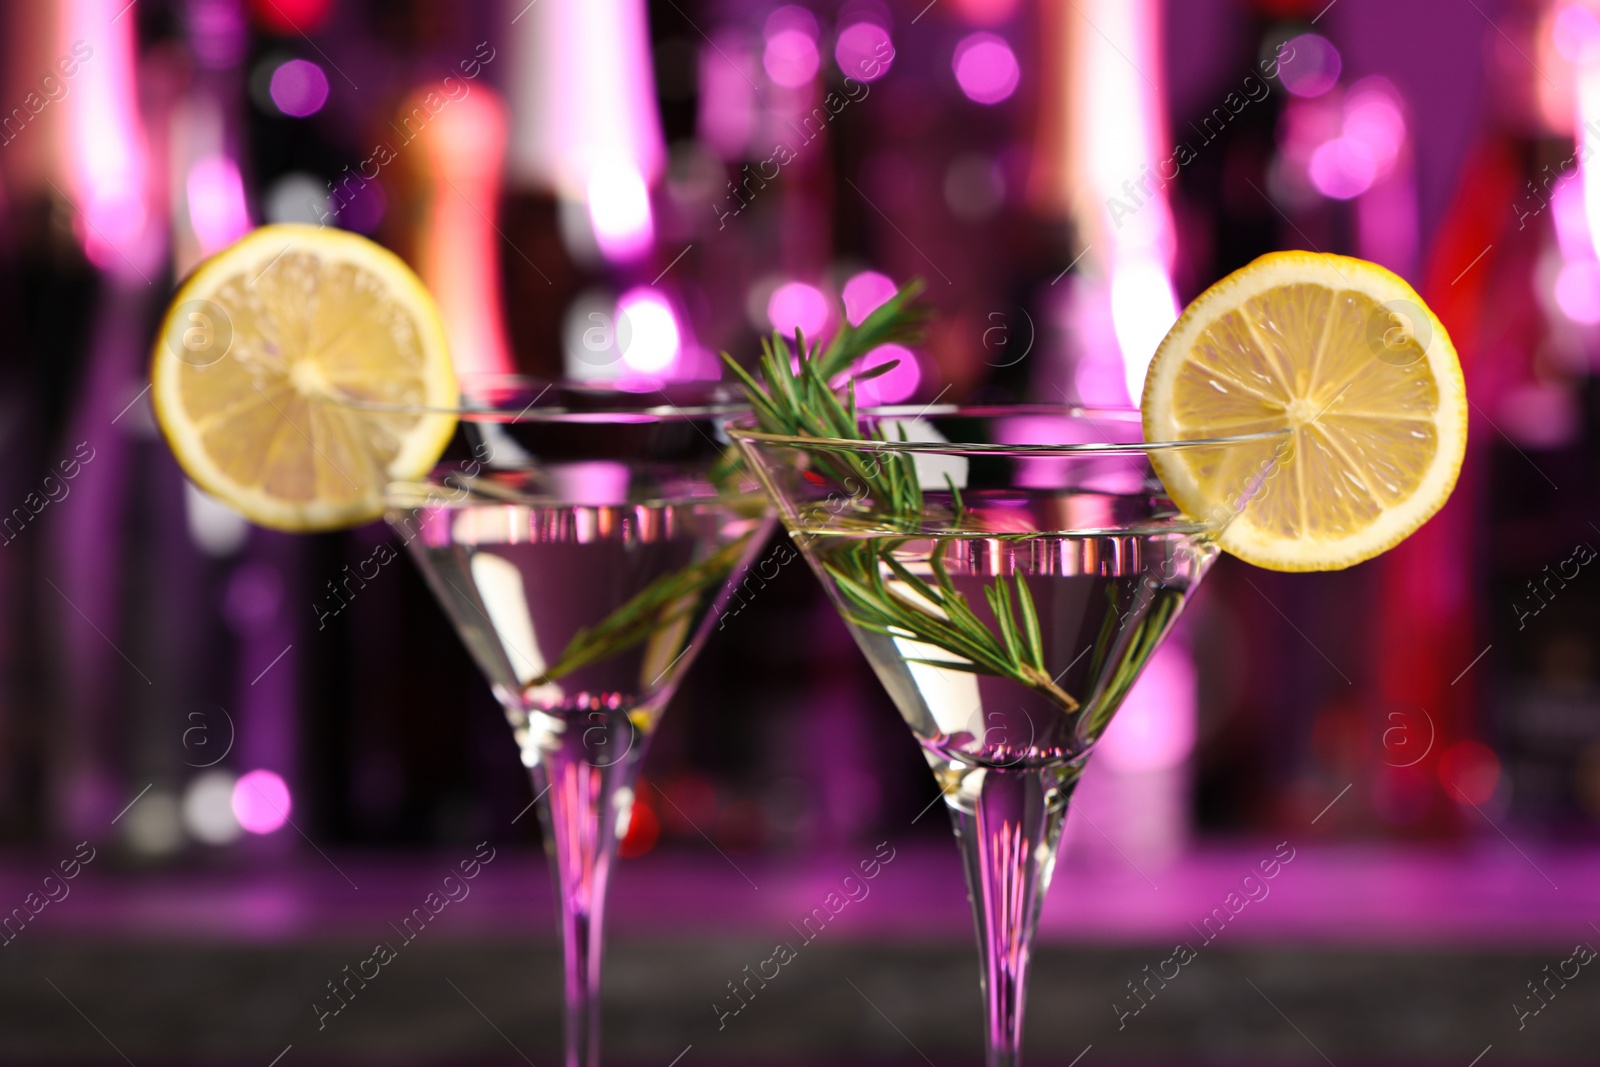 Photo of Martini glasses of refreshing cocktail, lemon slices and rosemary on blurred background